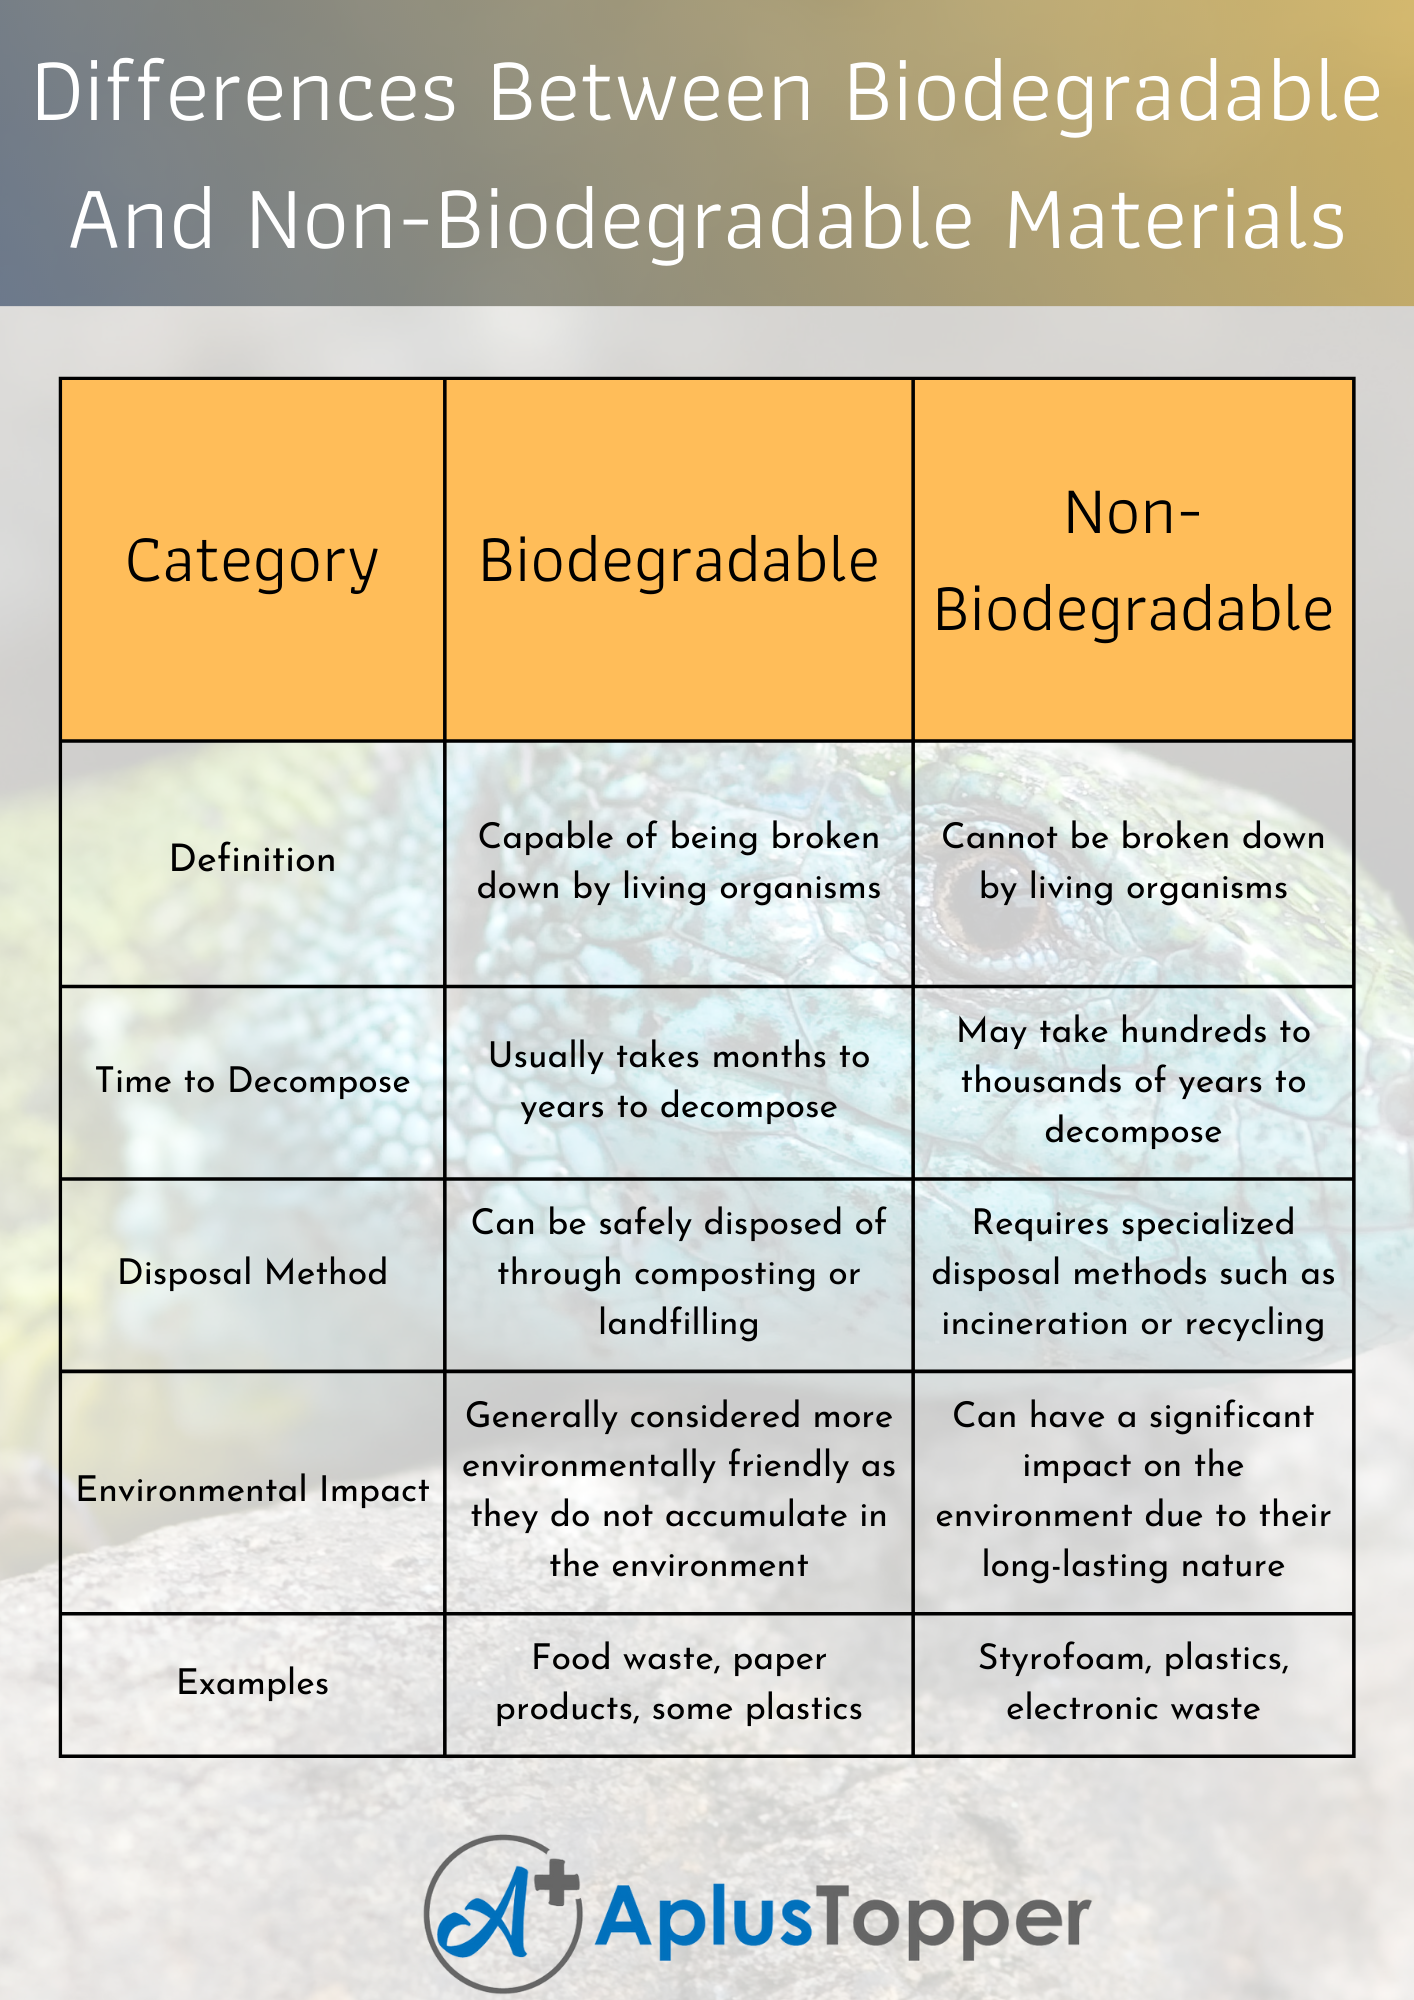 Key Differences Between Biodegradable And Non-Biodegradable Materials